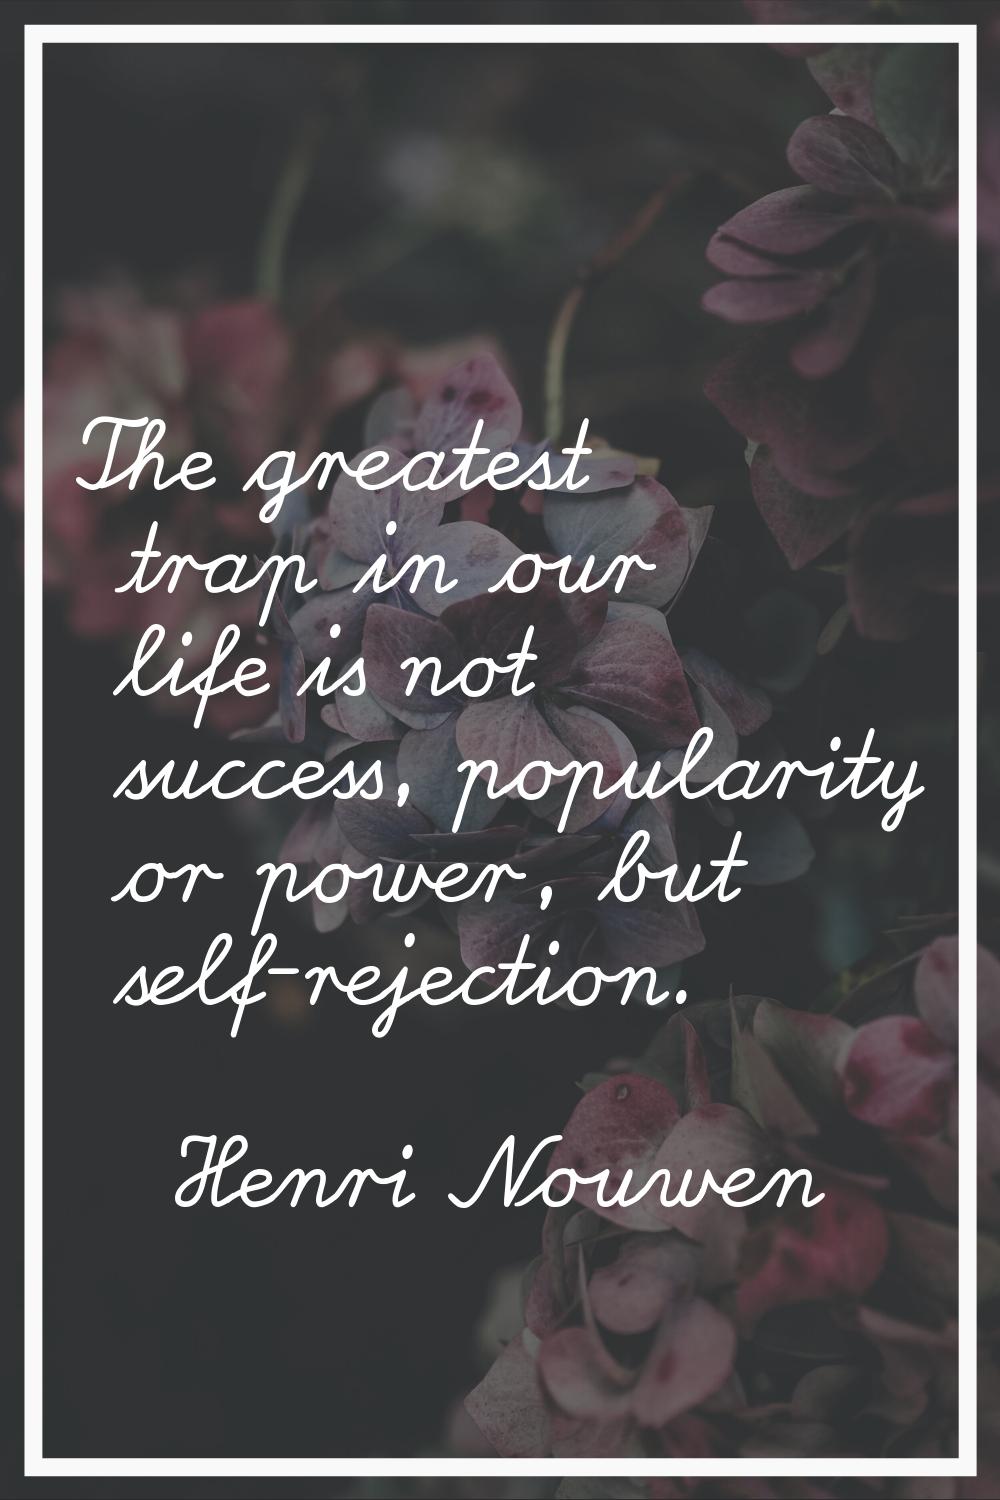 The greatest trap in our life is not success, popularity or power, but self-rejection.